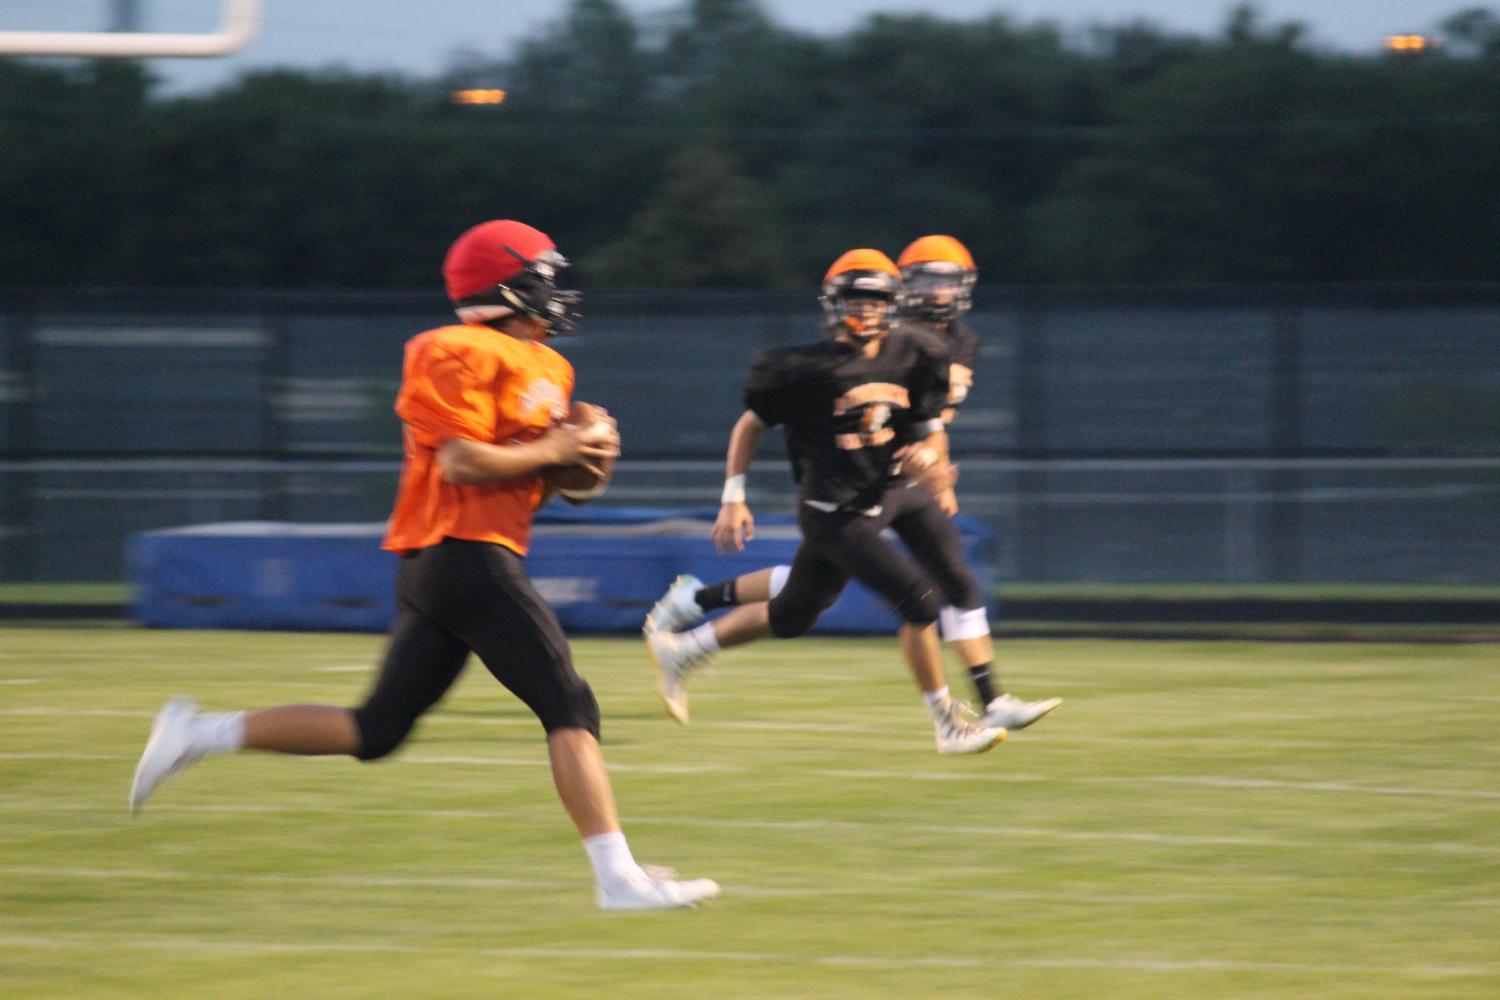 Senior+quarterback+Zach+Gessner+looks+to+pass+at+the+Meet+the+Indians+scrimmage+on+Aug.+18.+